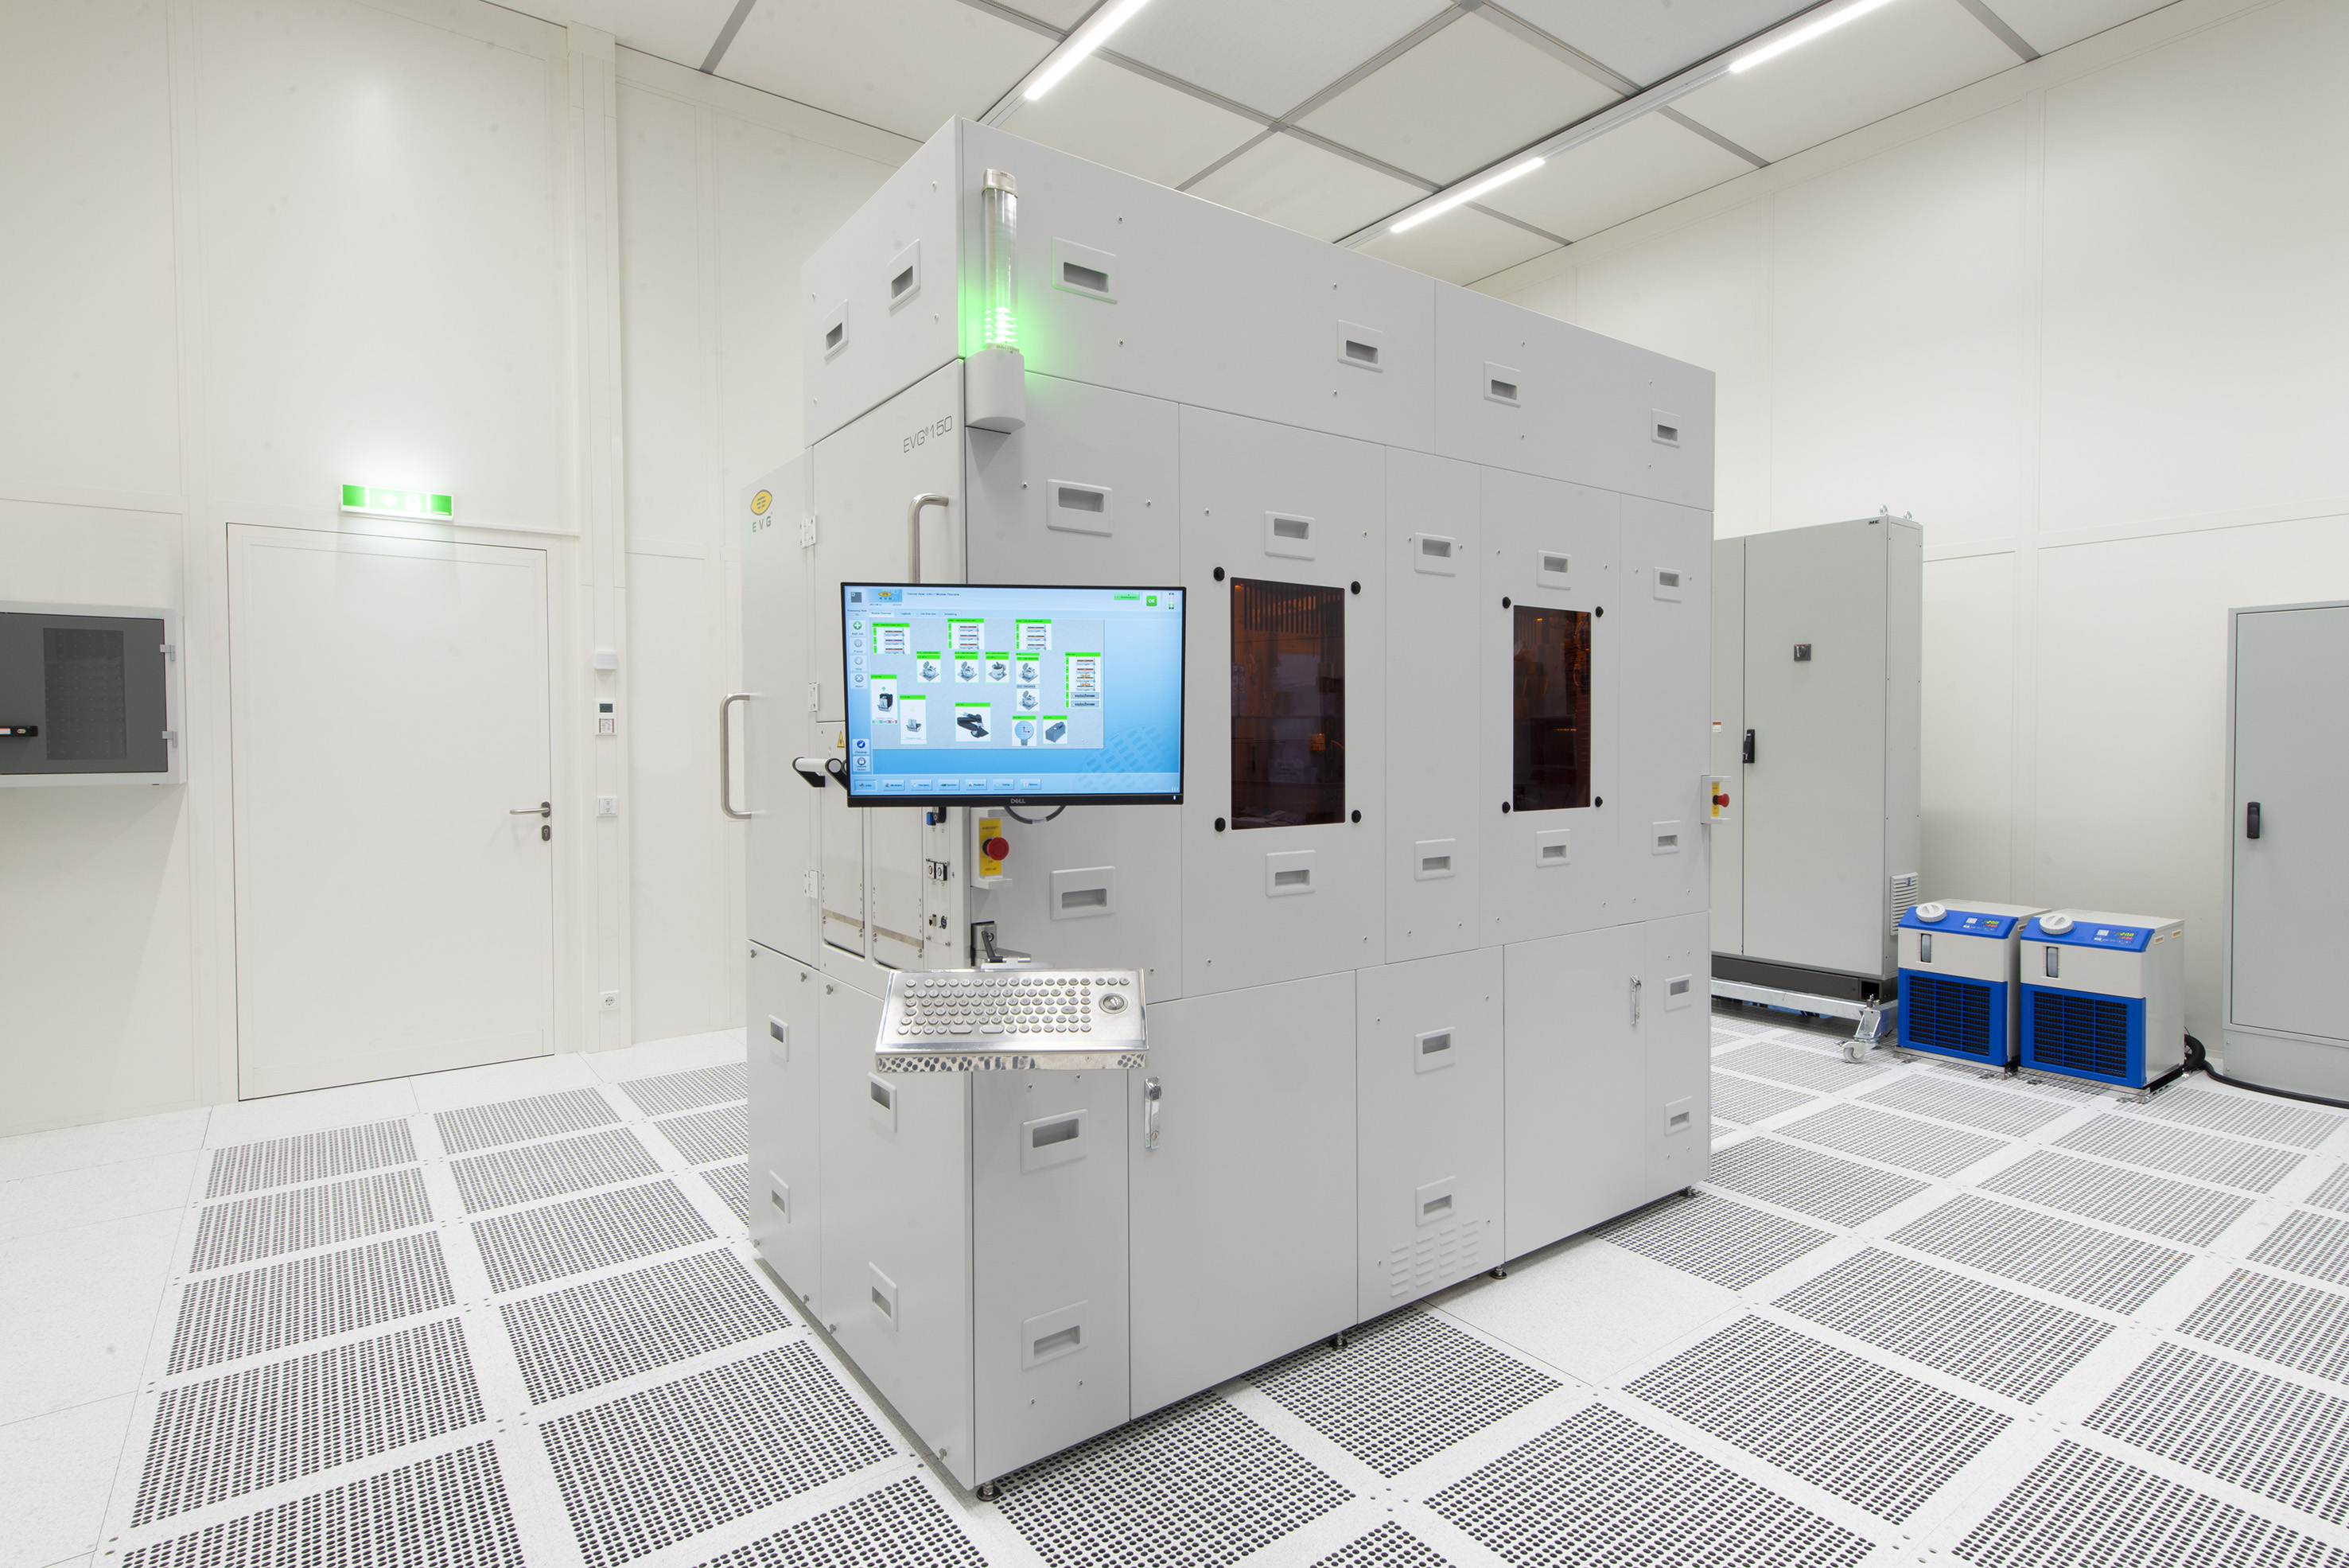 The EVG®150 automated resist processing system provides reliable and high-quality coating and developing processes in a universal platform that supports a variety of devices and applications, including advanced packaging, MEMS, radio frequency (RF), 3D sensing, power electronics, and photonics